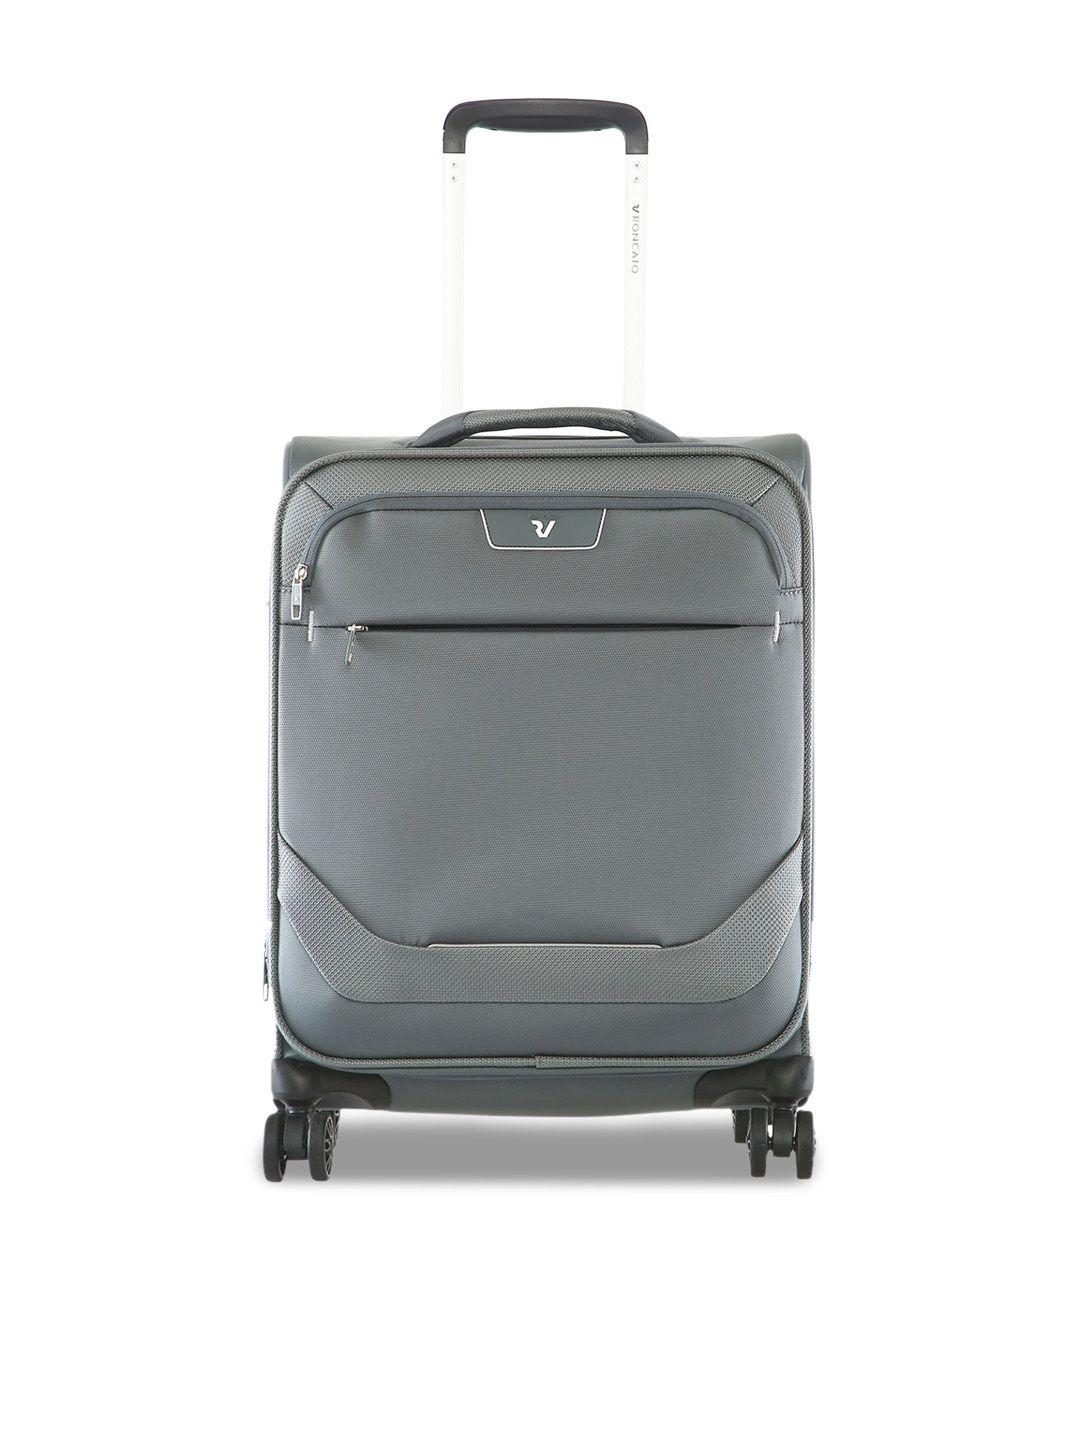 roncato textured soft-sided cabin trolley suitcase